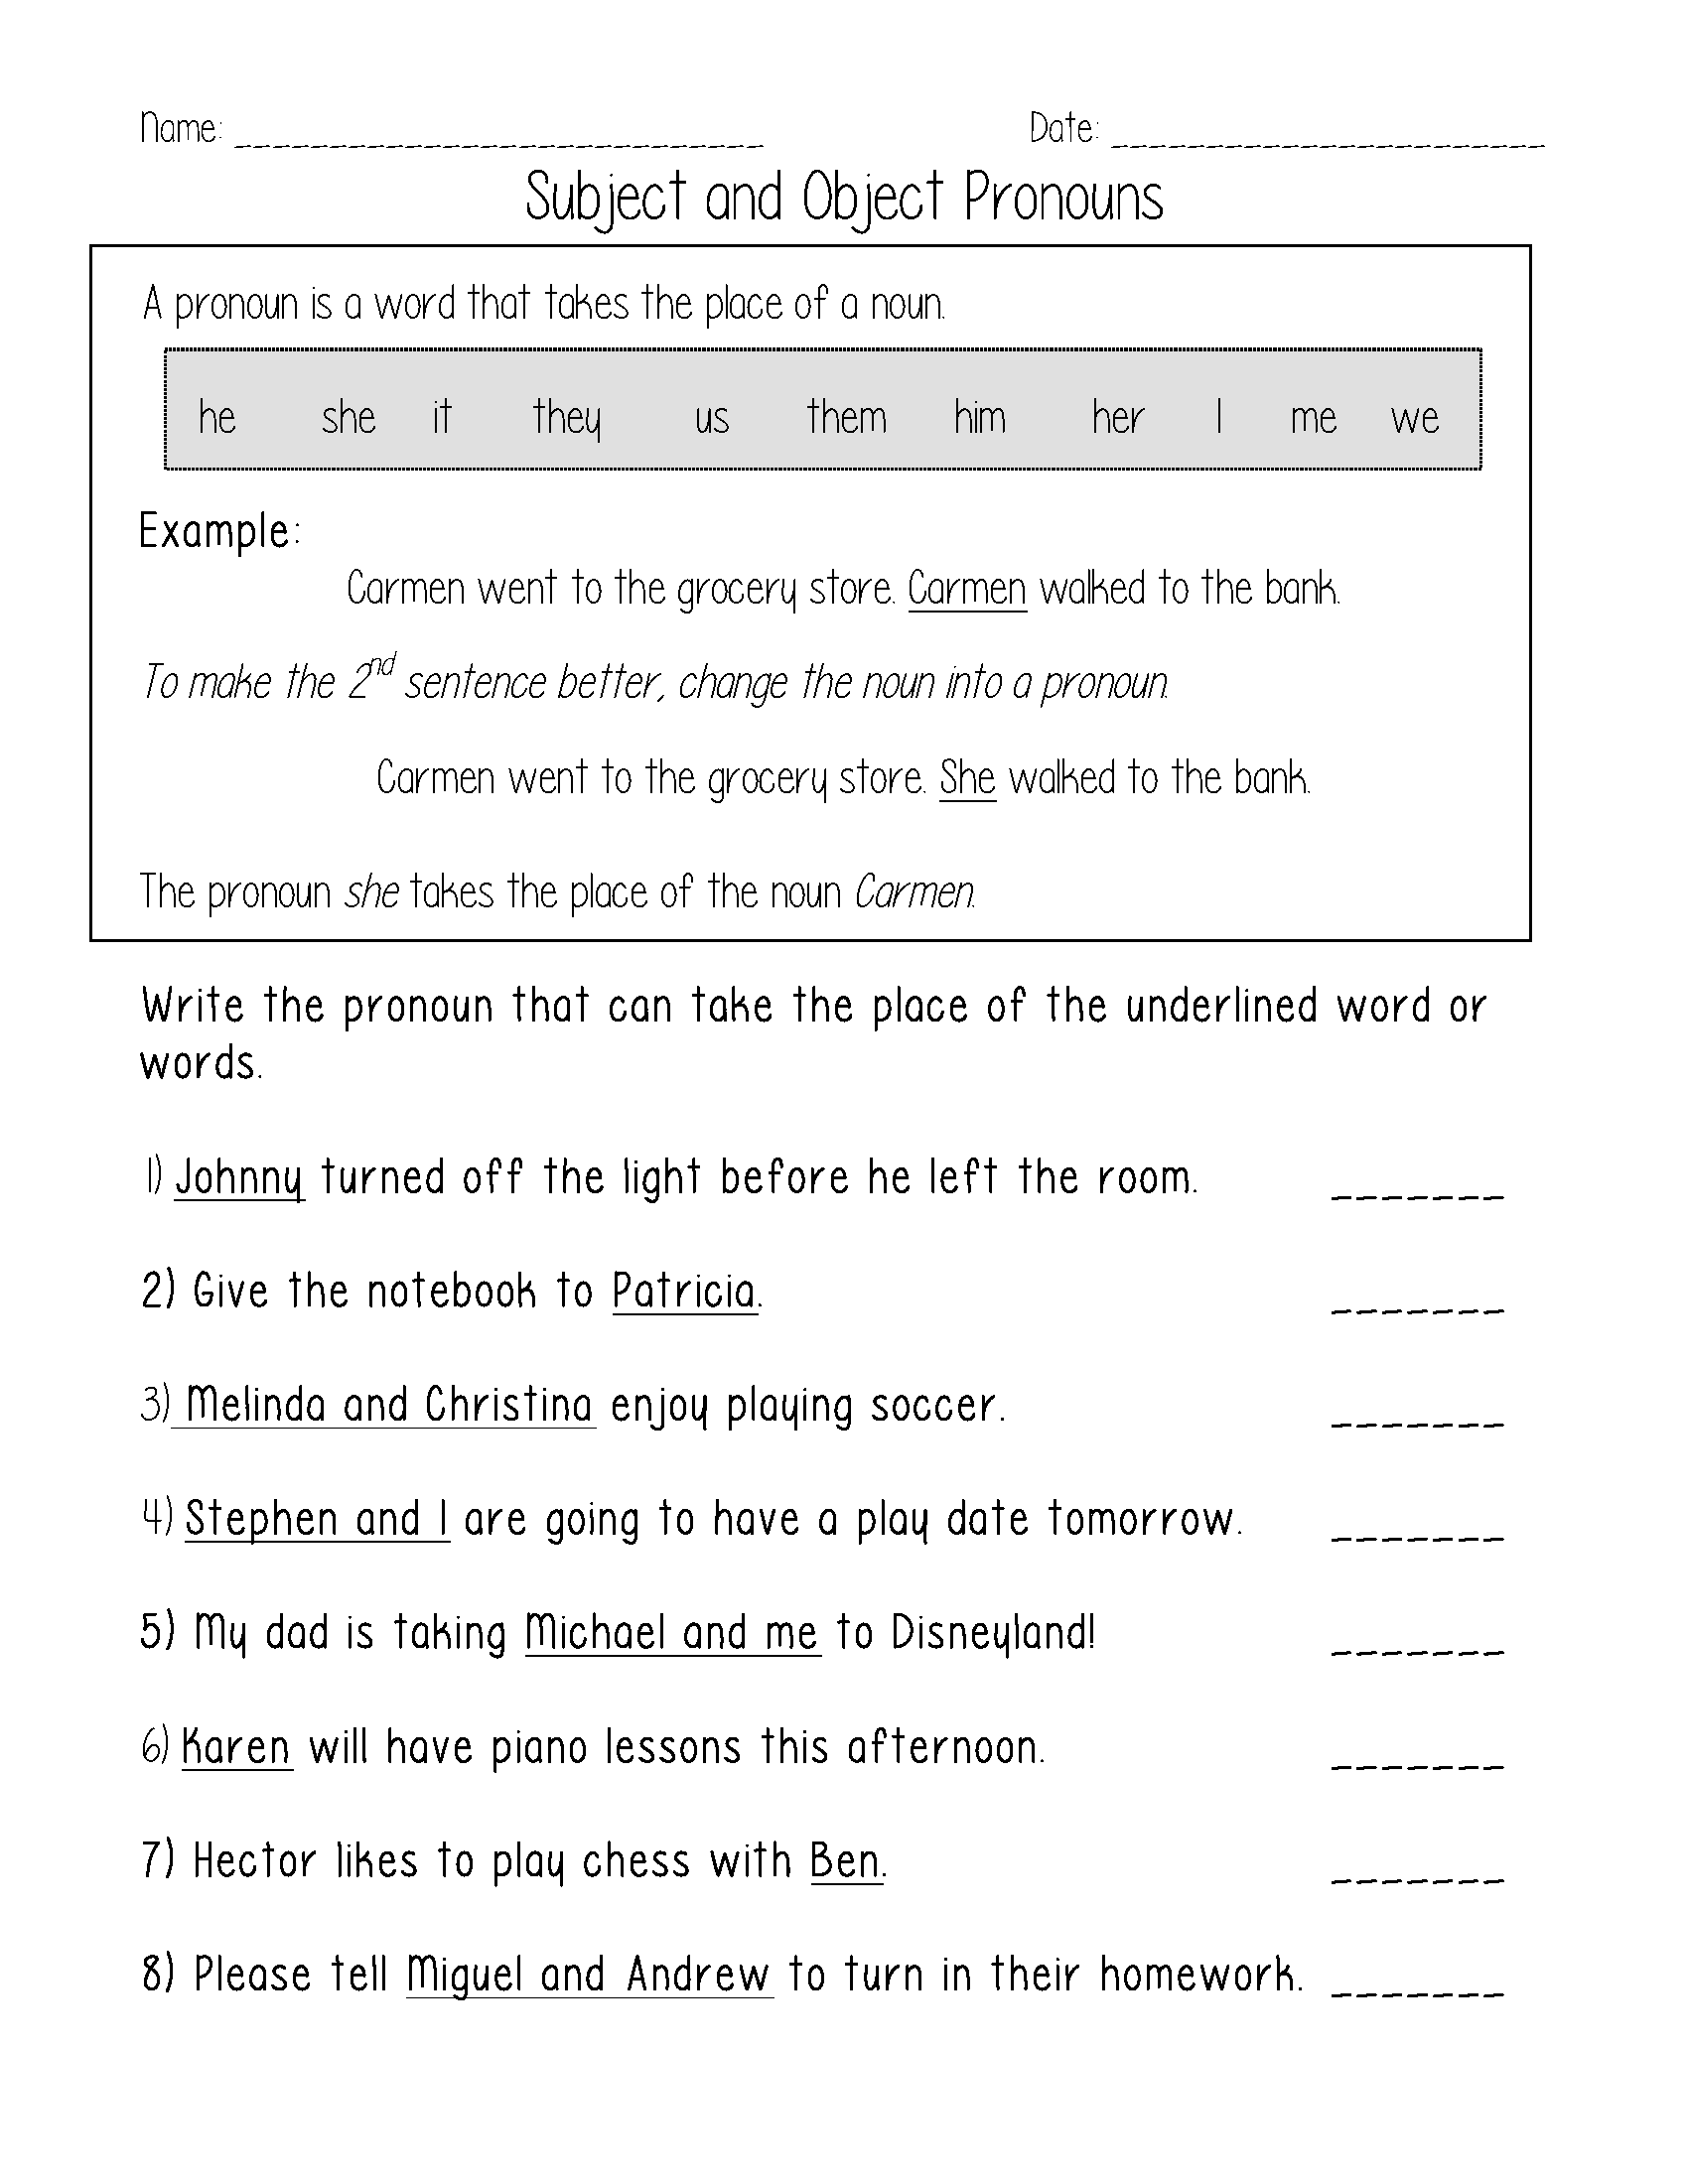 14 Best Images of Possessive Pronouns Adjectives Worksheets  Spanish Possessive Adjectives 